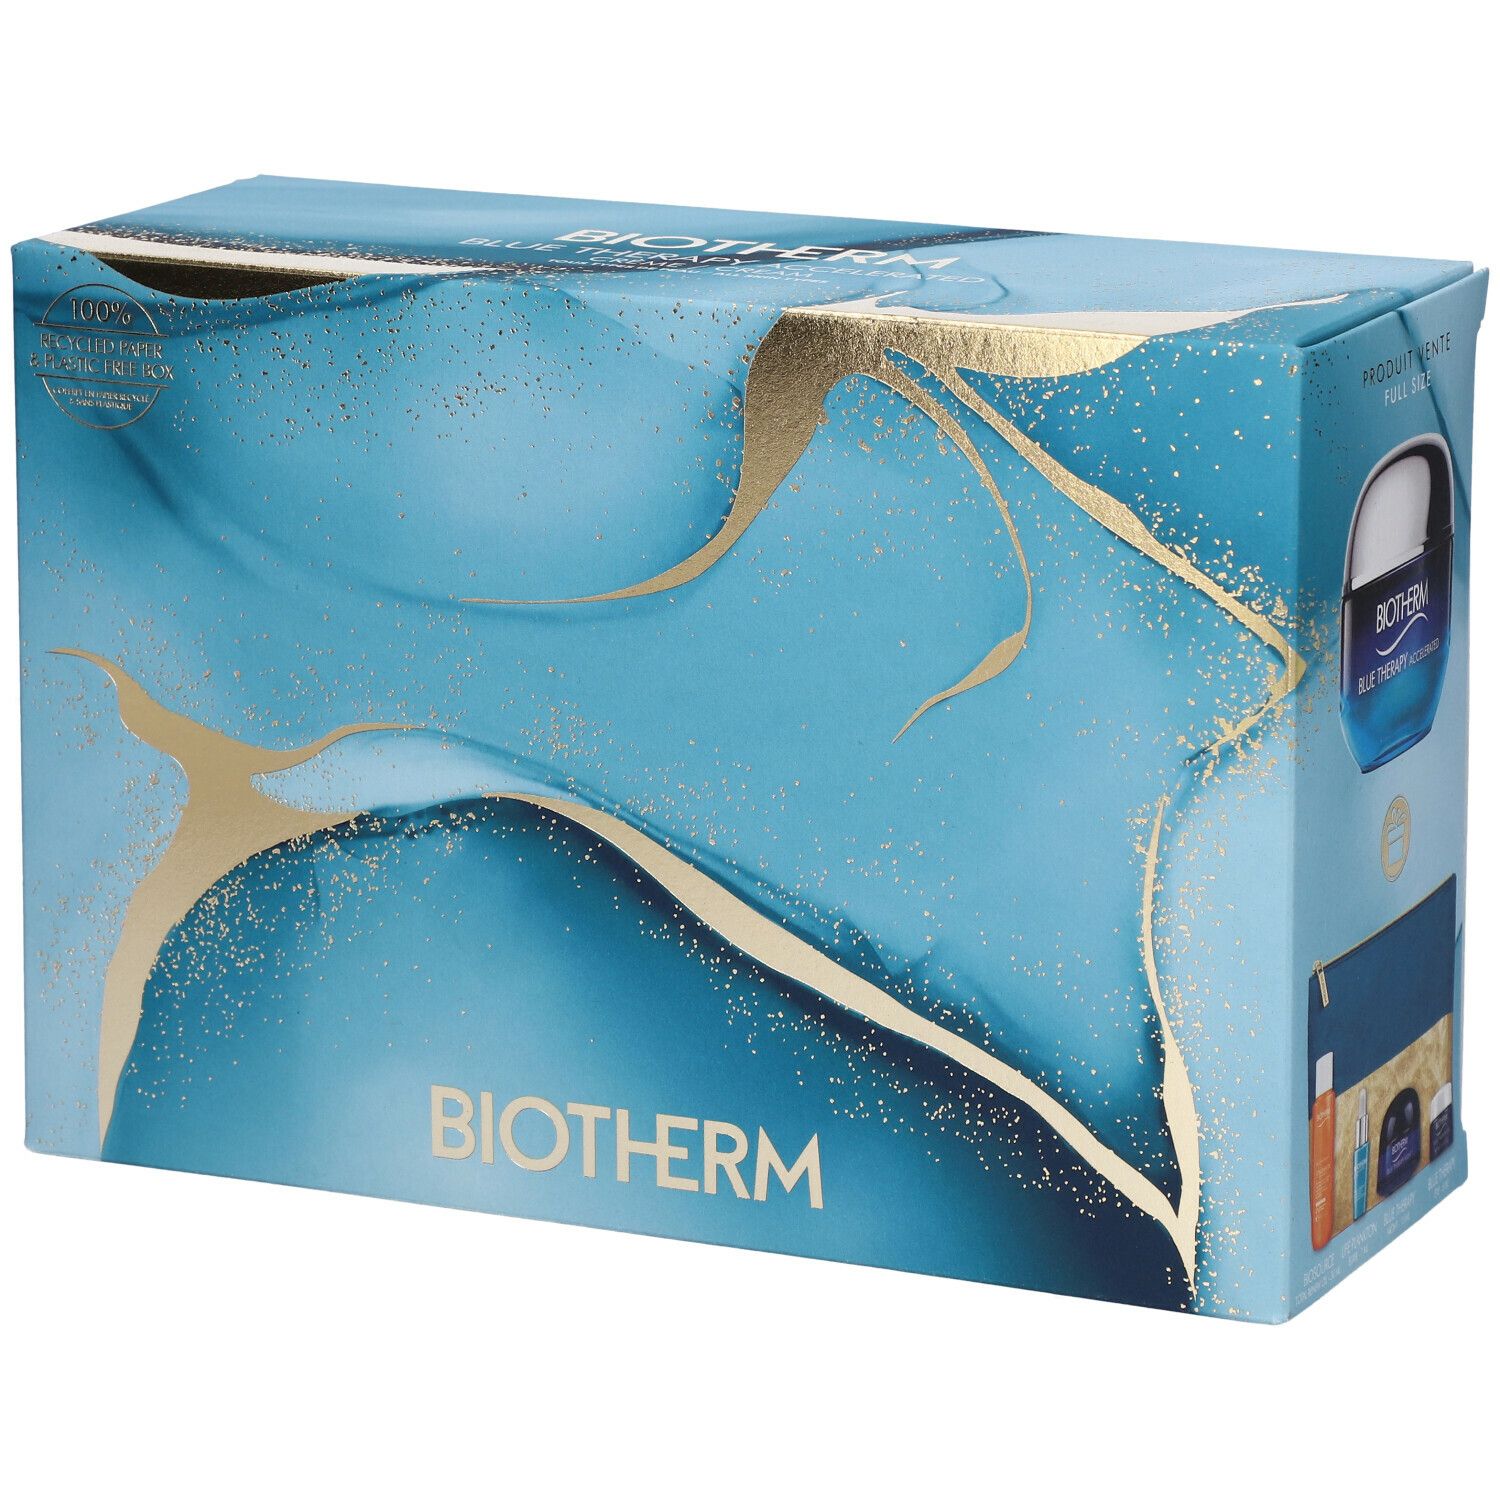 Image of BIOTHERM Anti-Aging-Set Weihnachten Blue Therapy